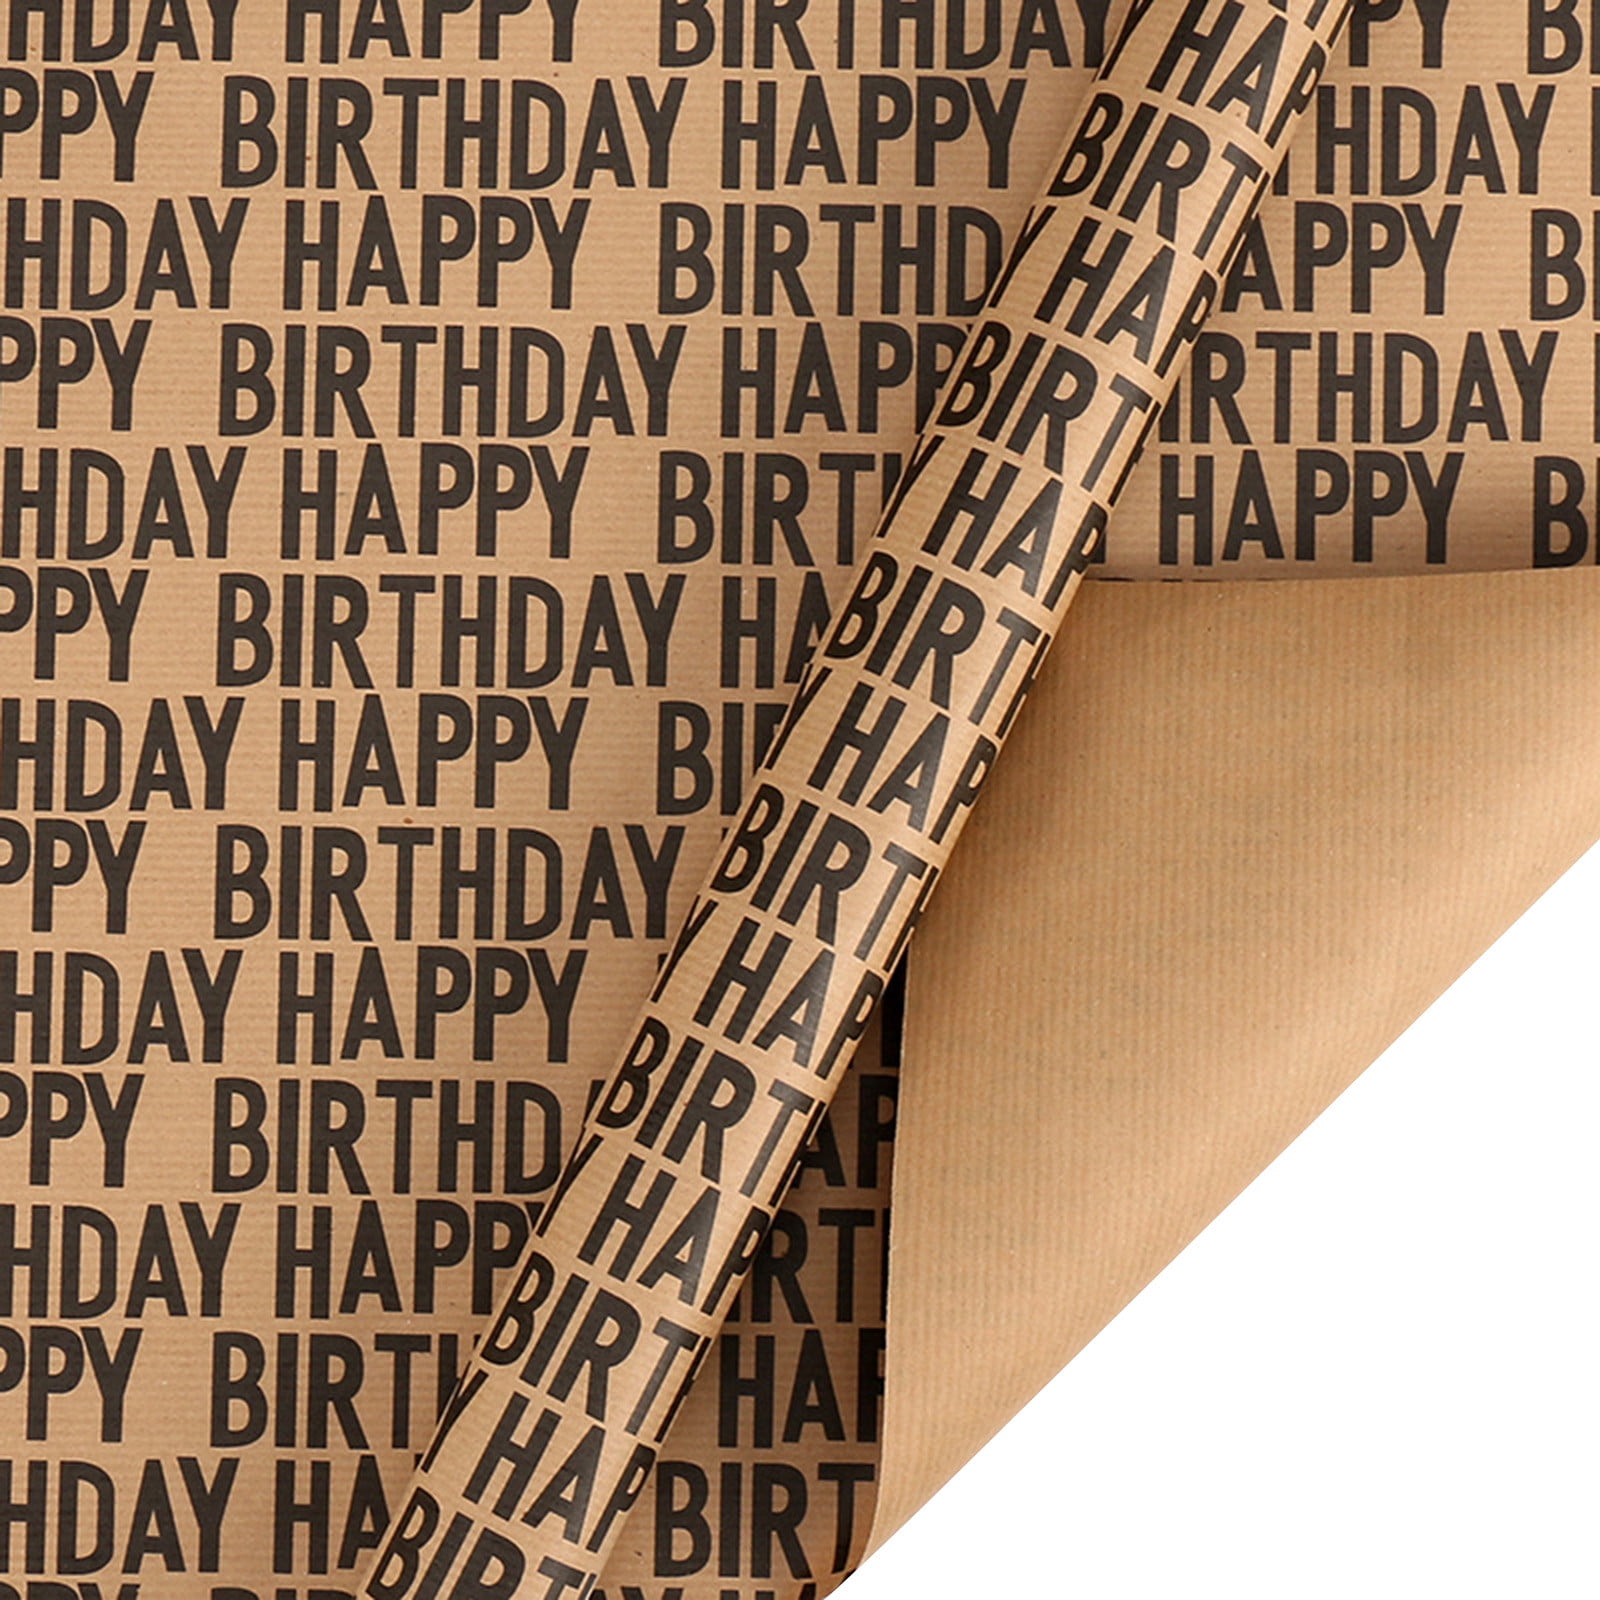 Happy Birthday Wrapping Paper With Your Photos on It